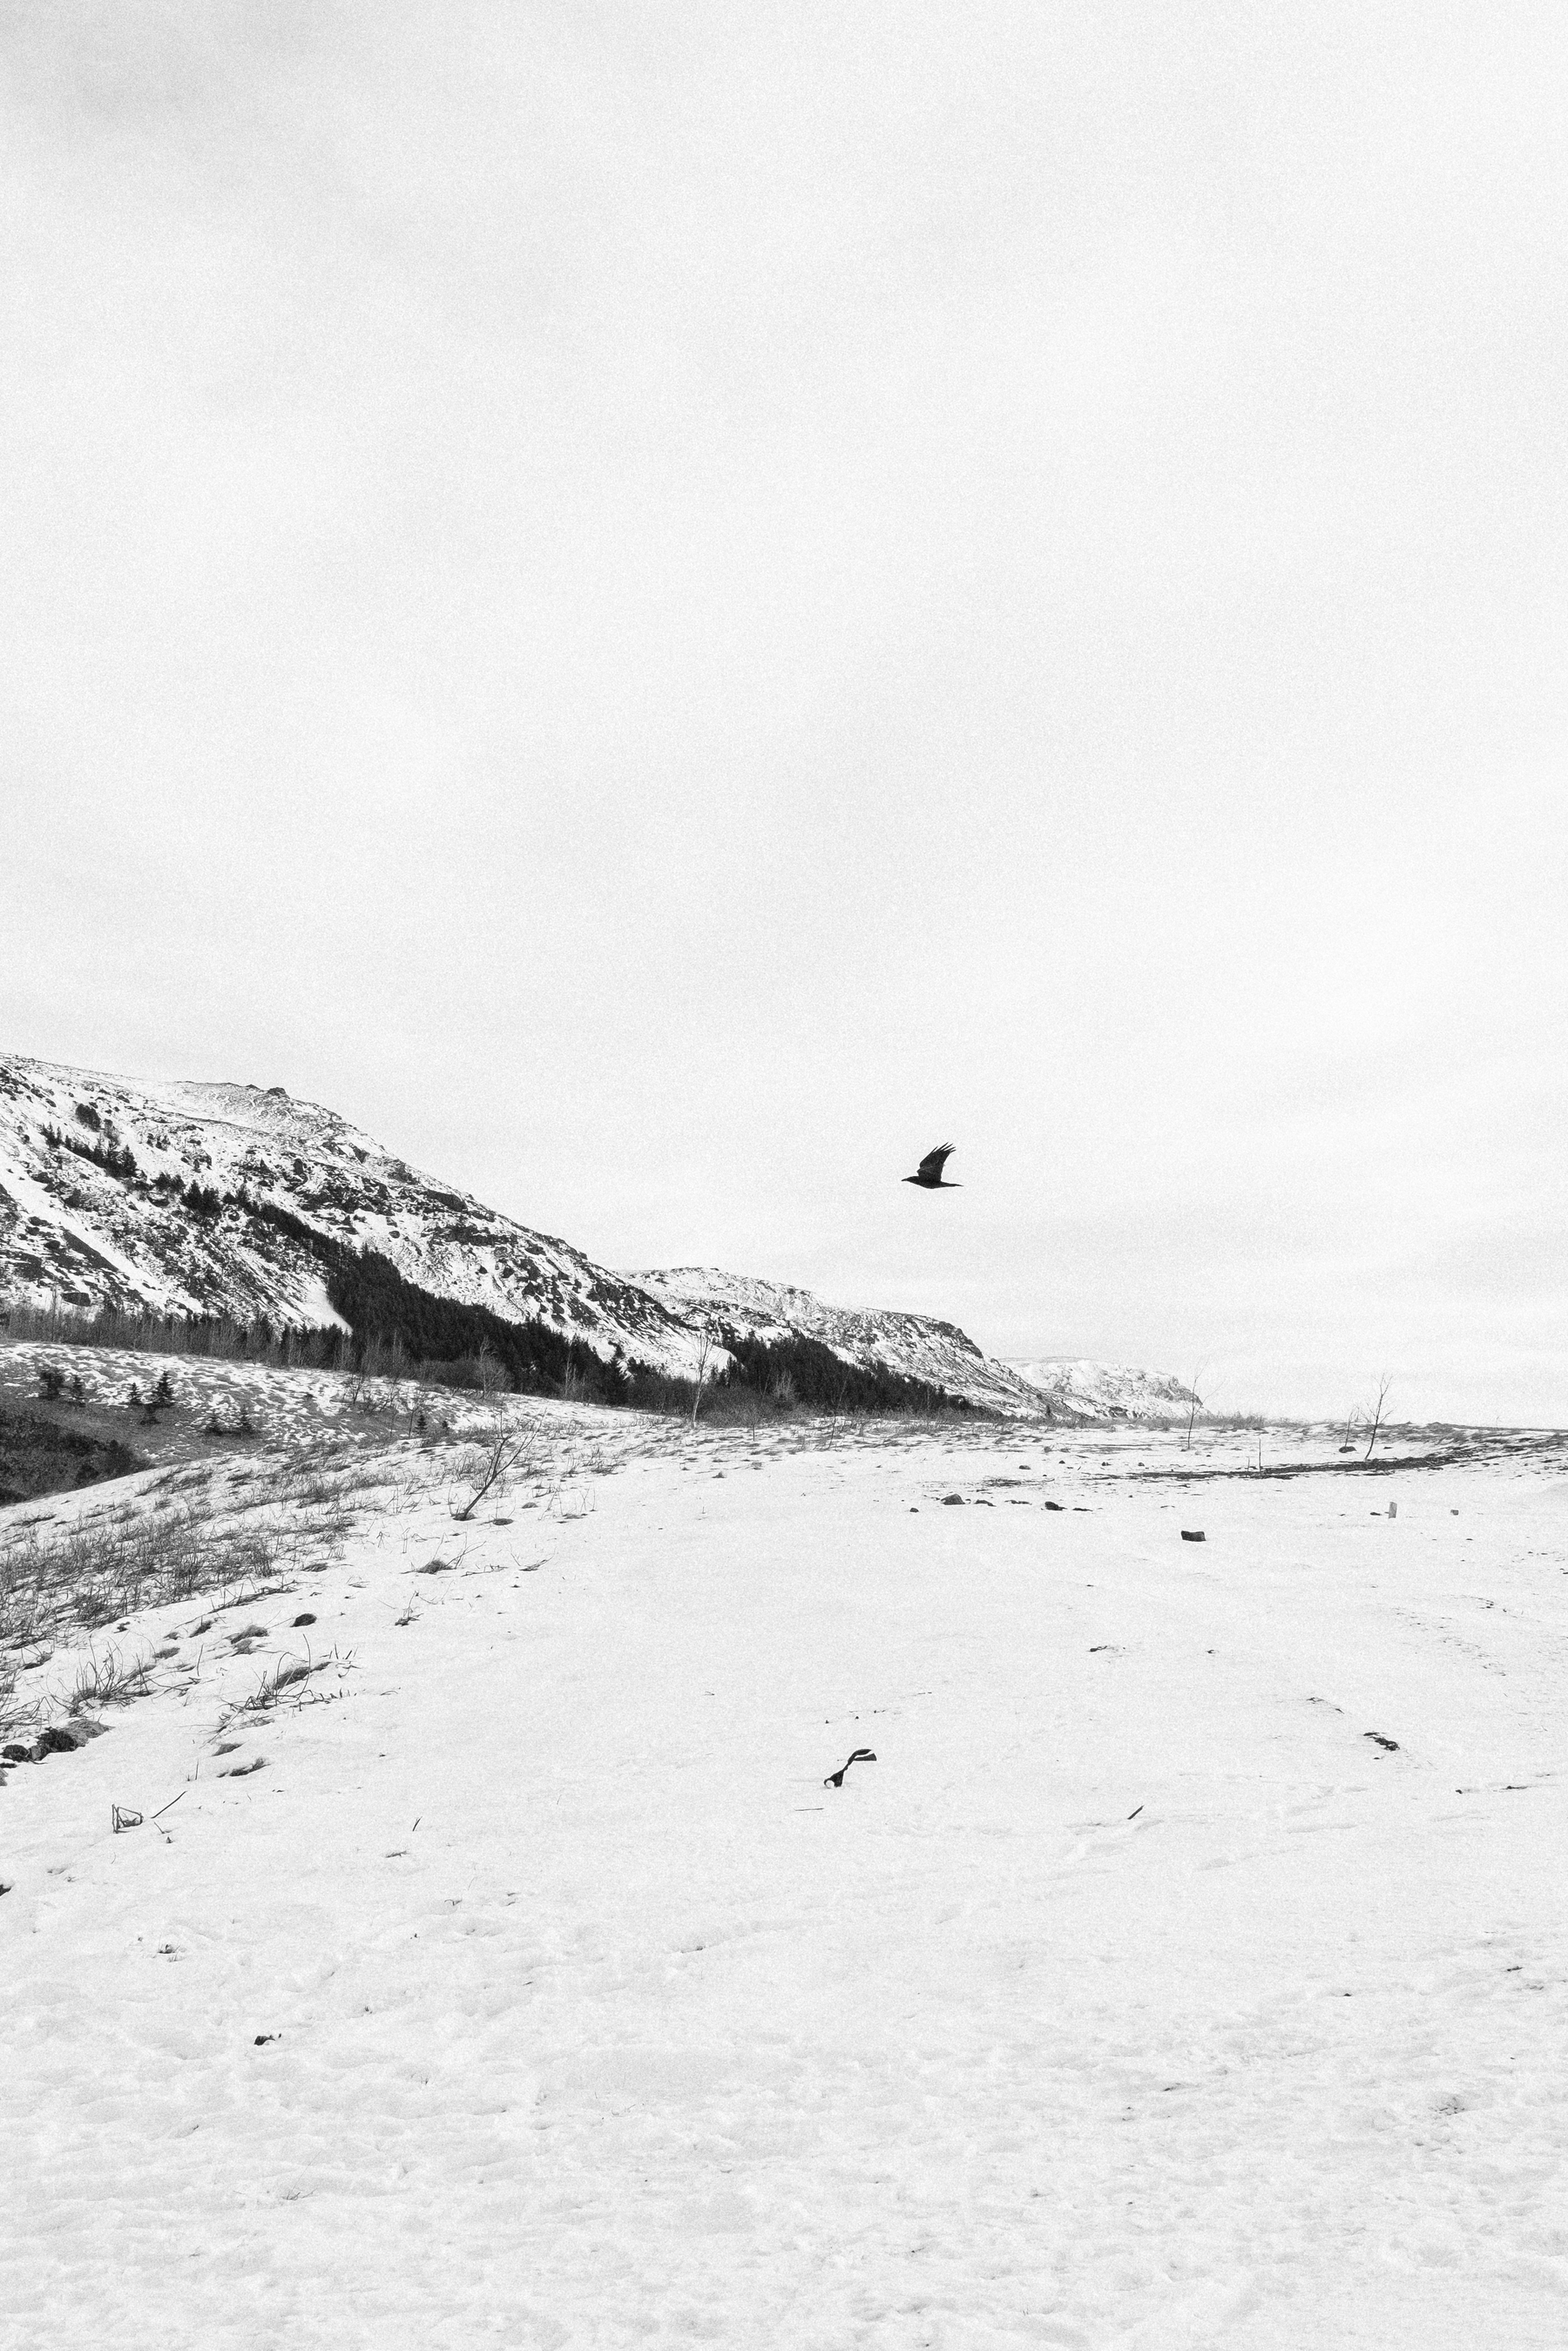 A raven flies over a snowy landscape. You can see one of the local mountains in the background